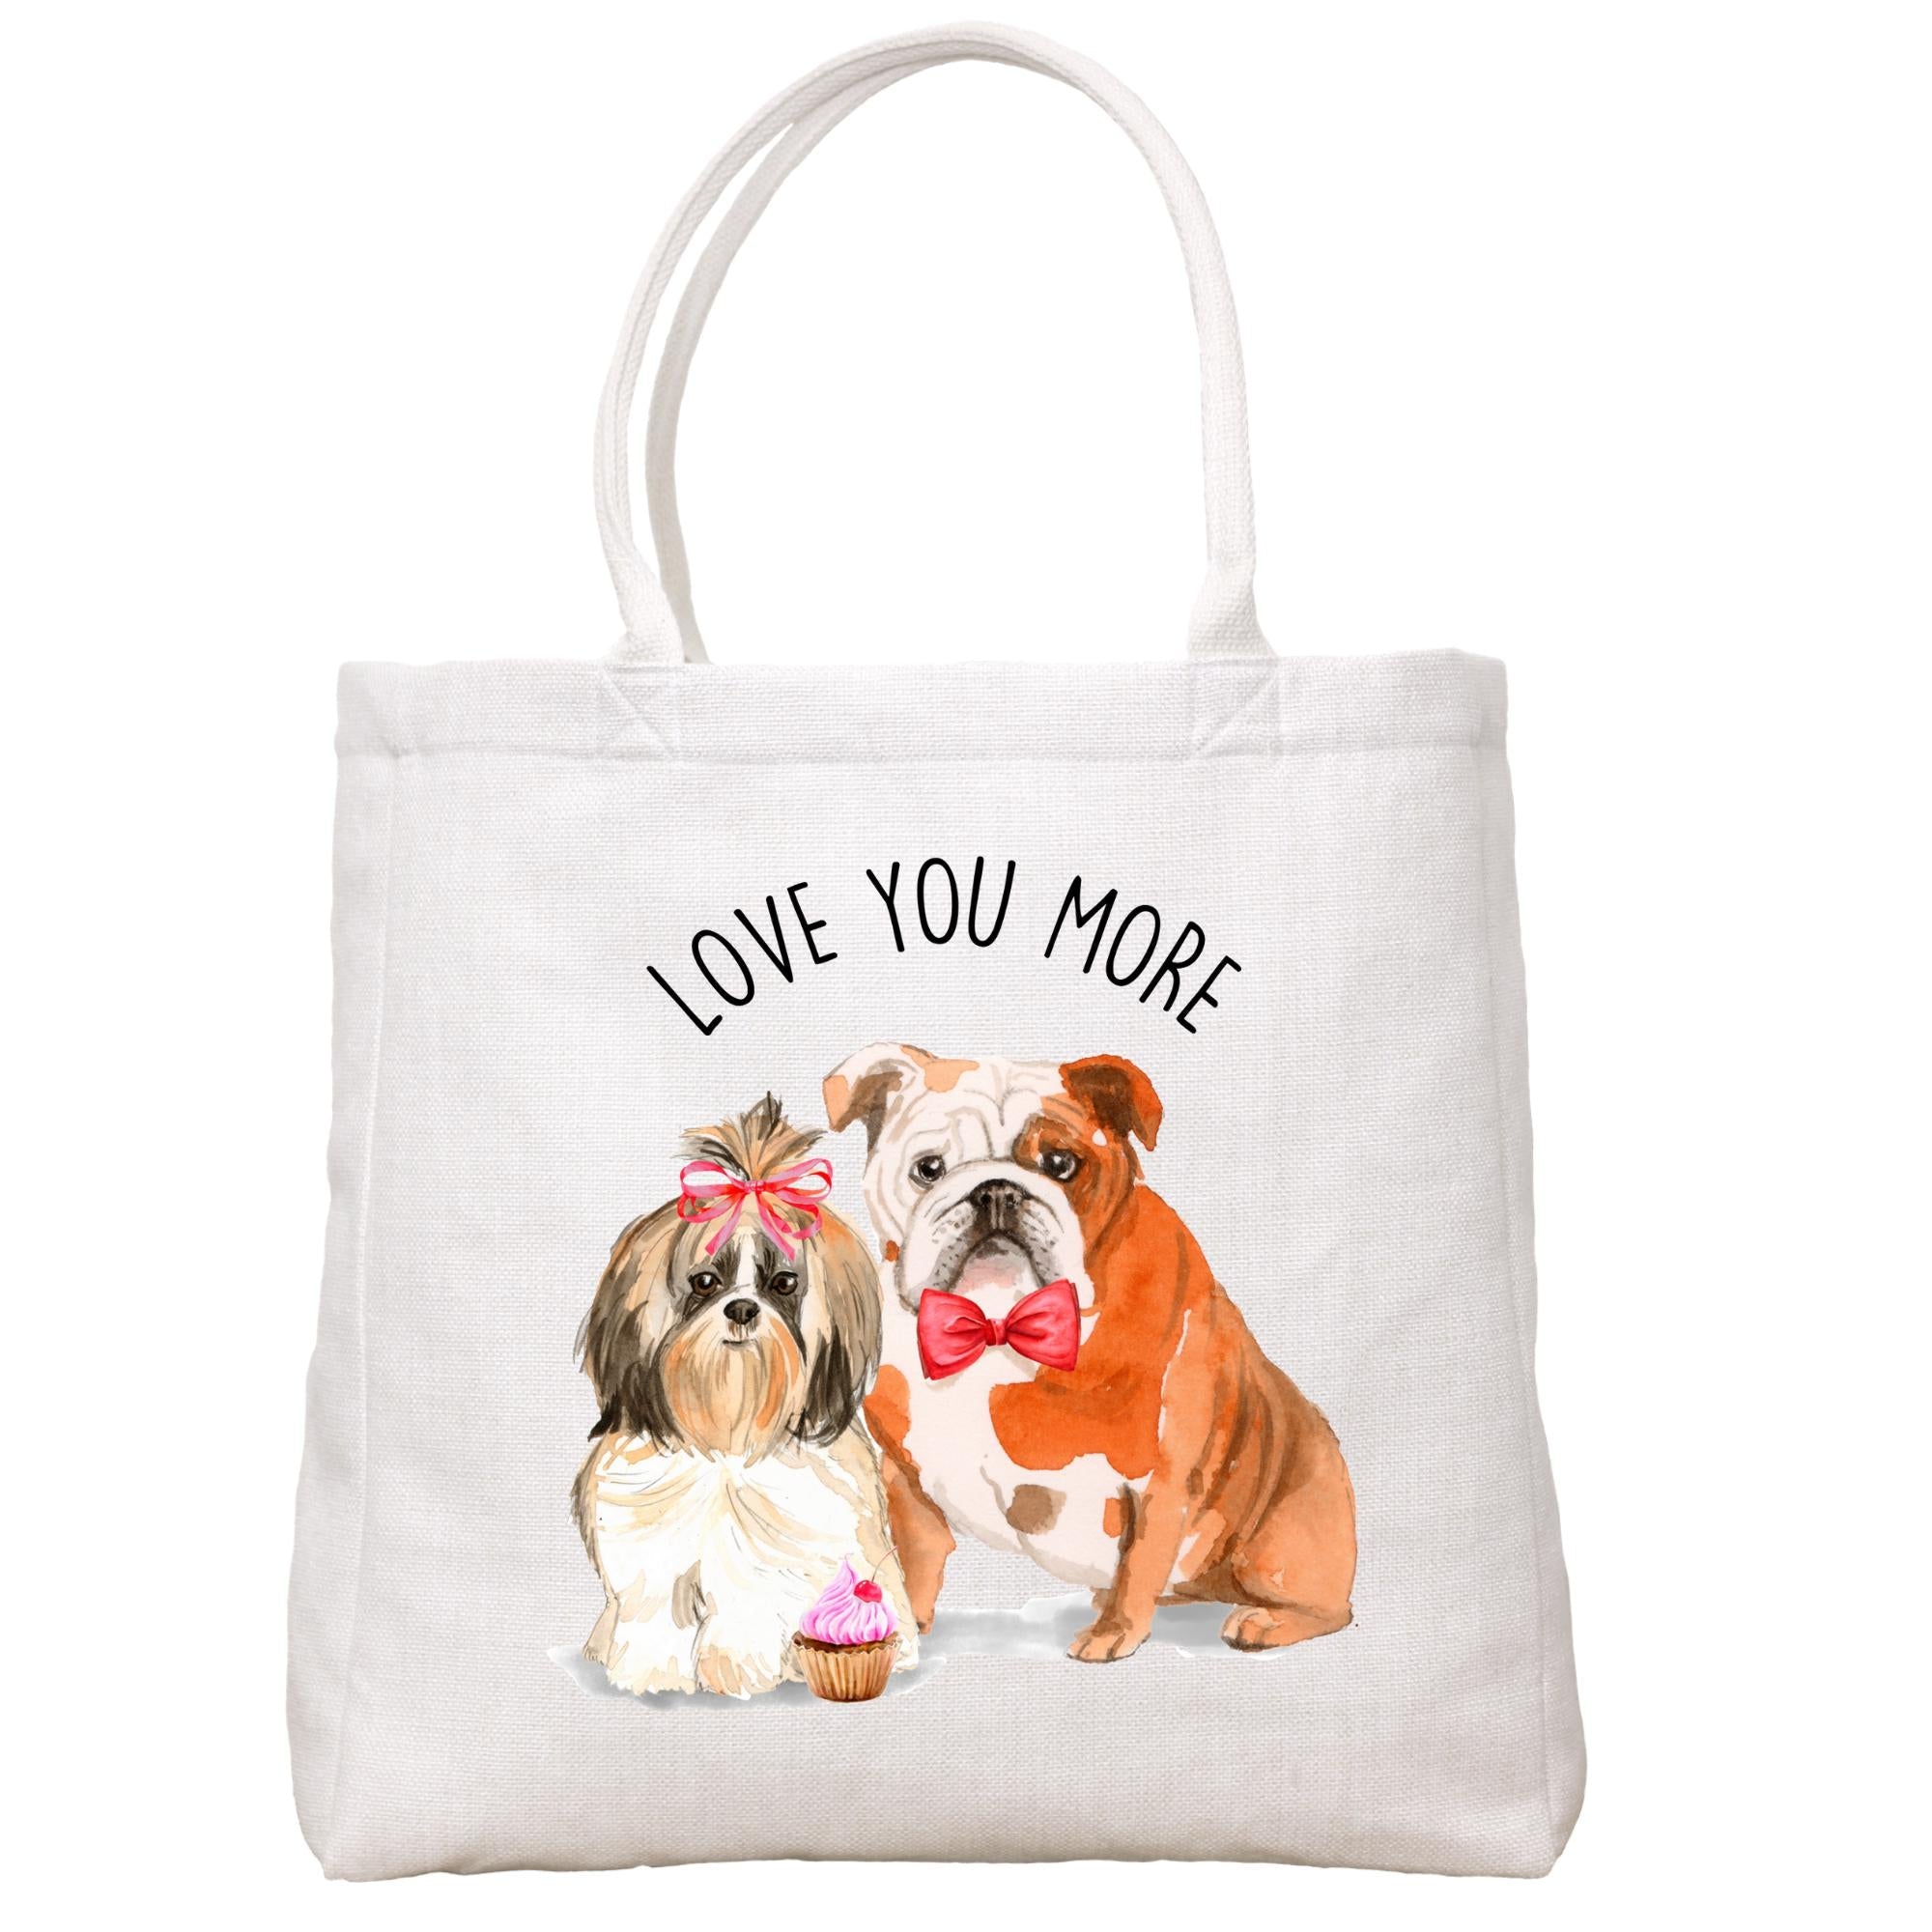 Love You More Dogs Tote Bag Tote Bag - Southern Sisters